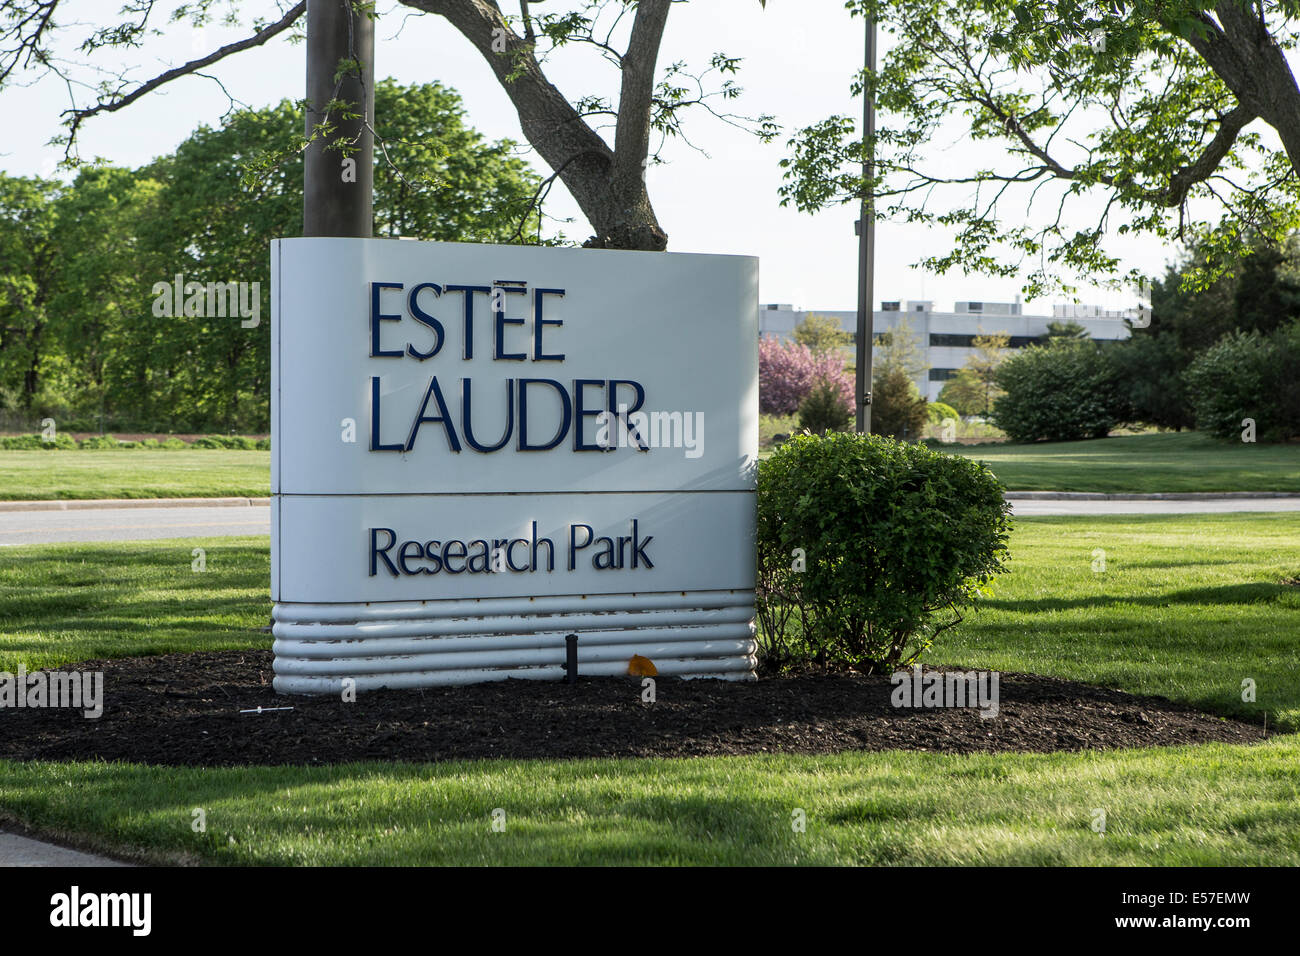 Estee Lauder research park is pictured in Long Island, NY Stock Photo